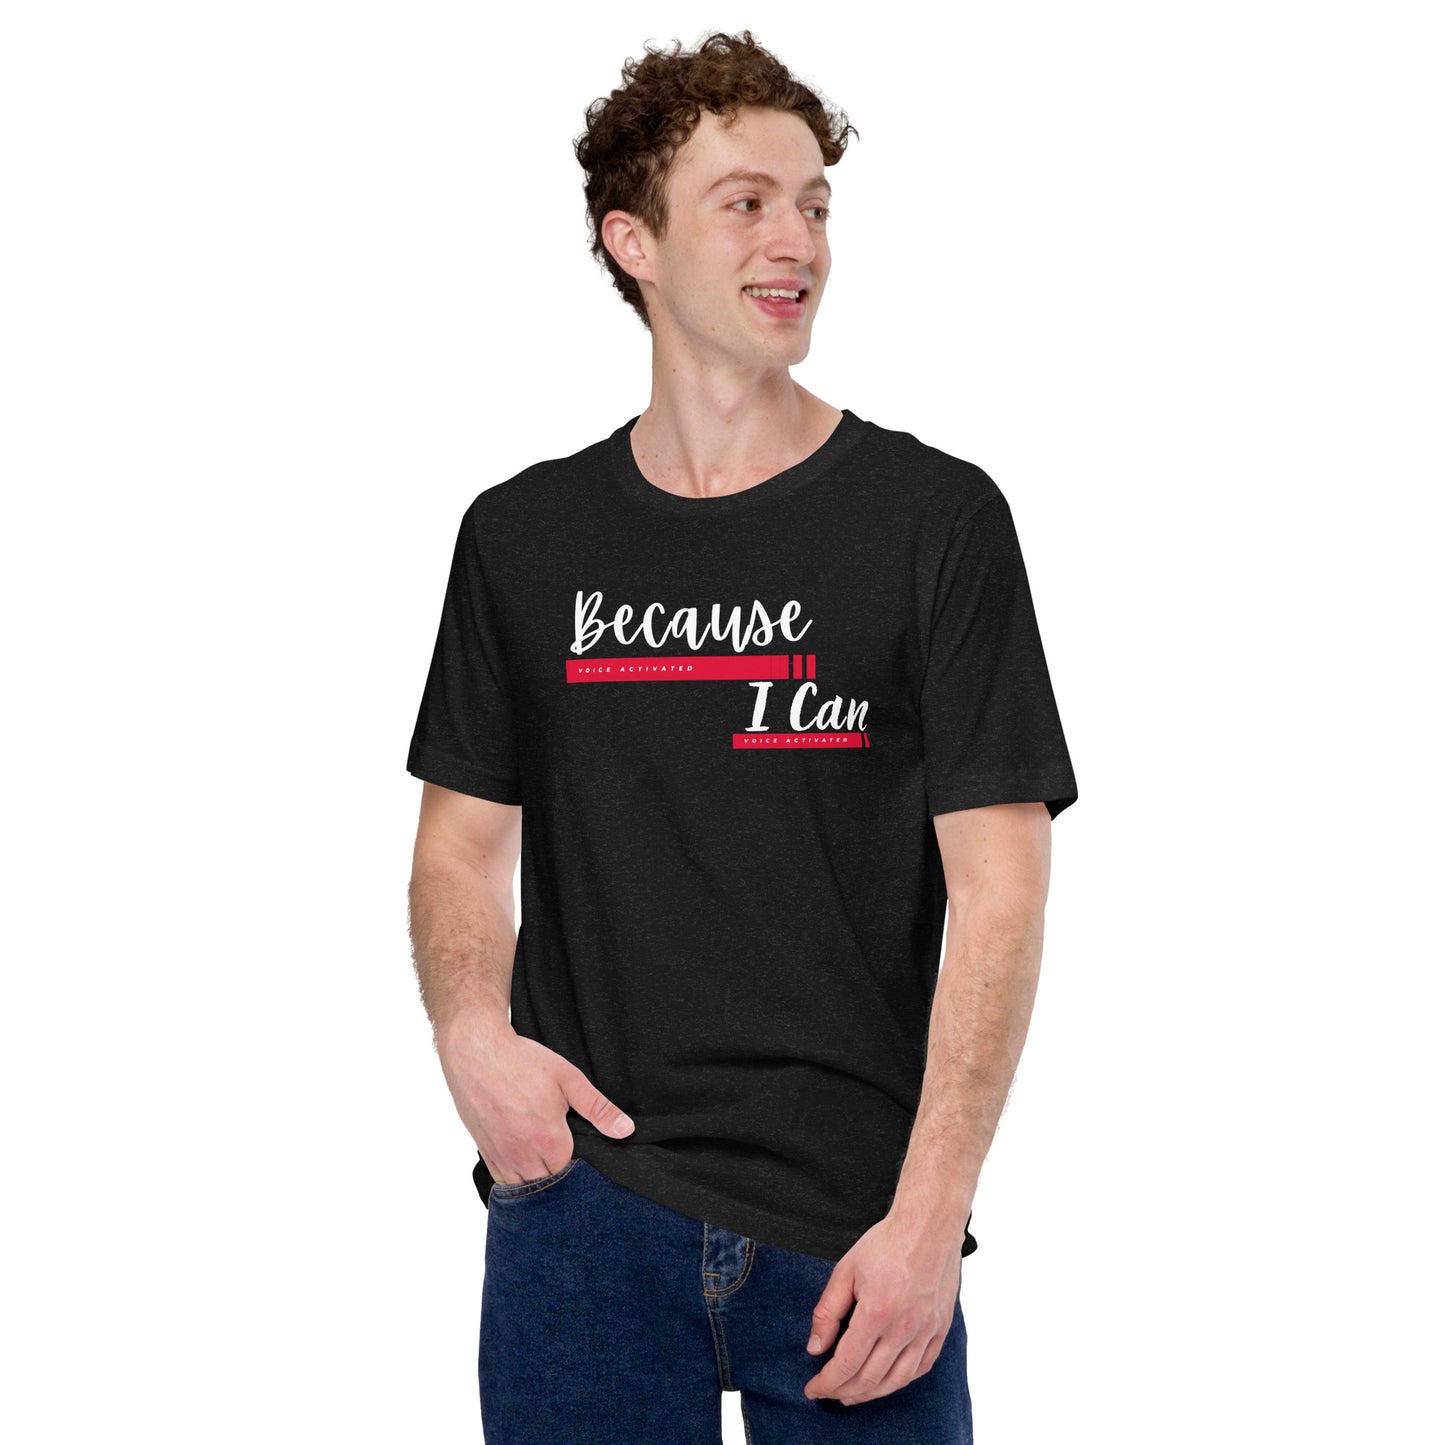 "Because I Can" Unisex t-shirt